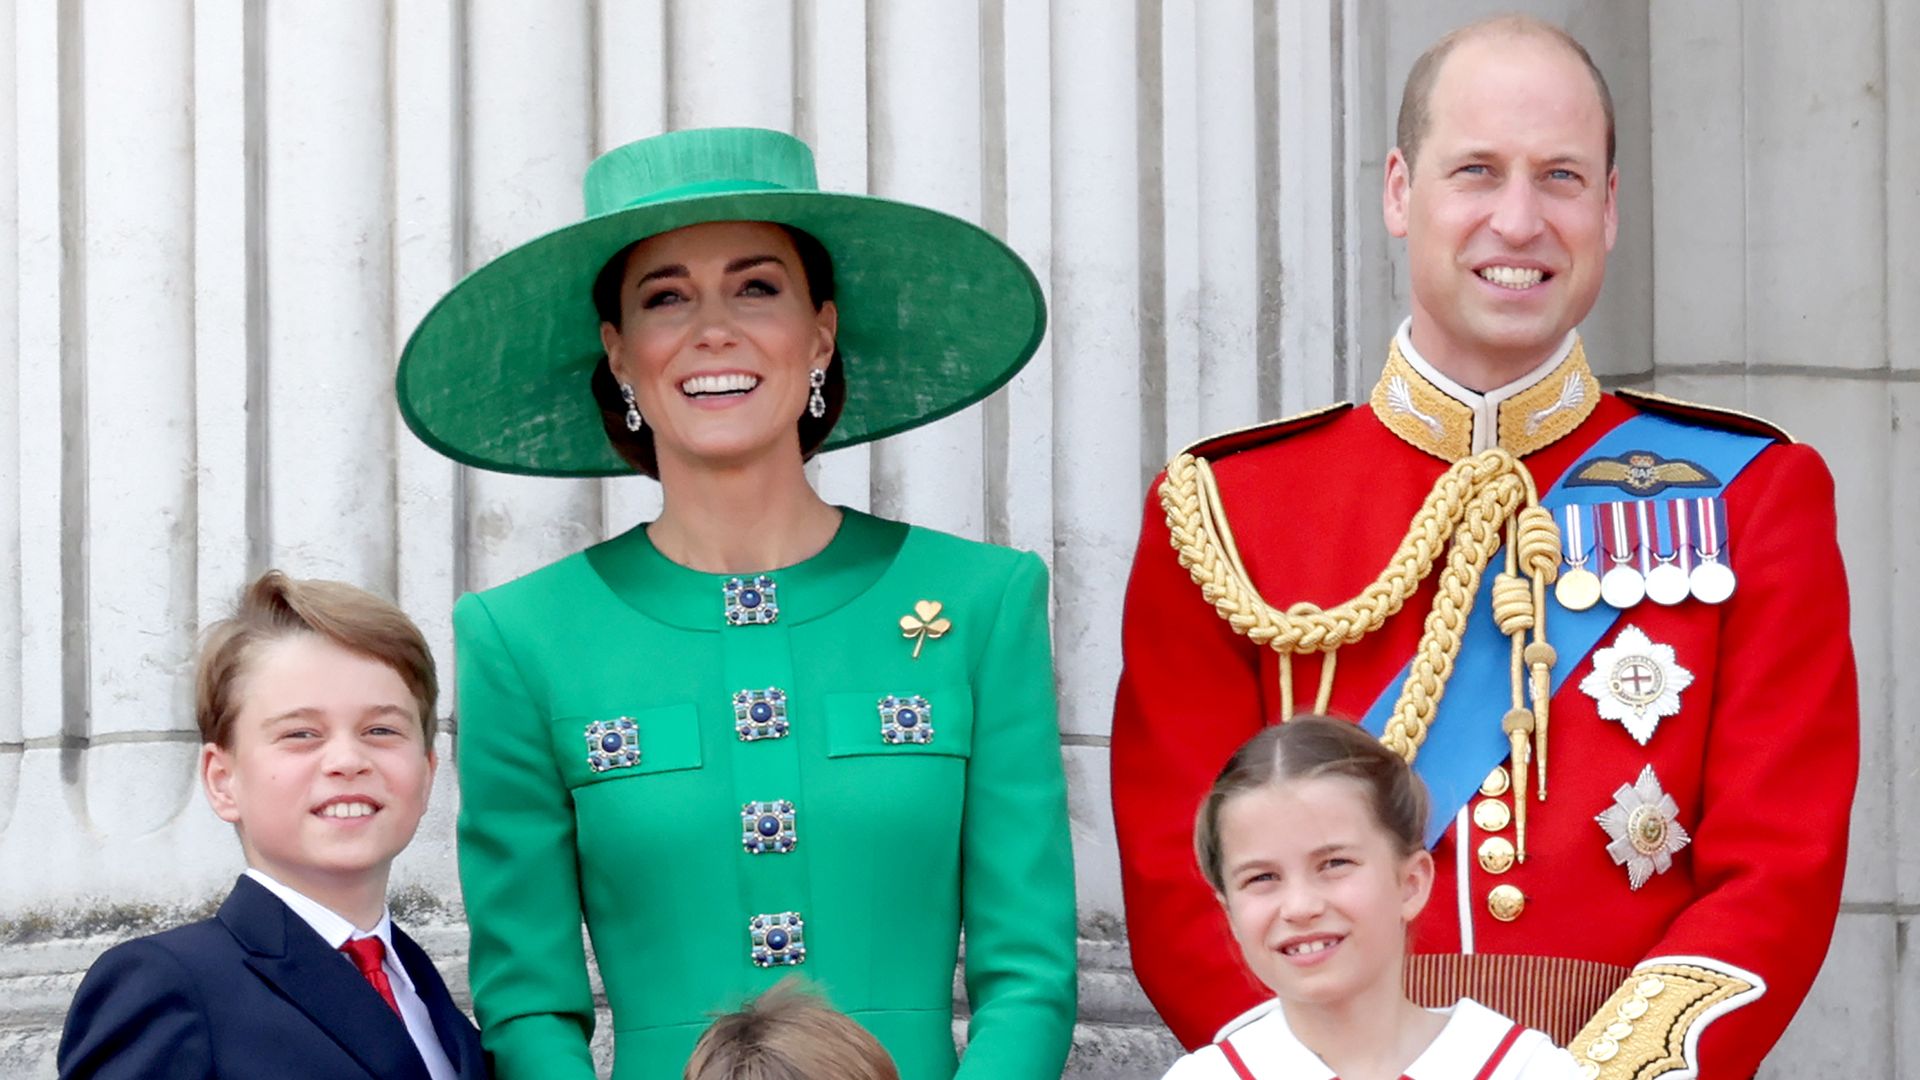 Prince William, Prince of Wales, Prince Louis of Wales, Catherine, Princess of Wales , Princess Charlotte of Wales and Prince George of Wales on the Buckingham Palace balcony during Trooping the Colour on June 17, 2023 in London, England.